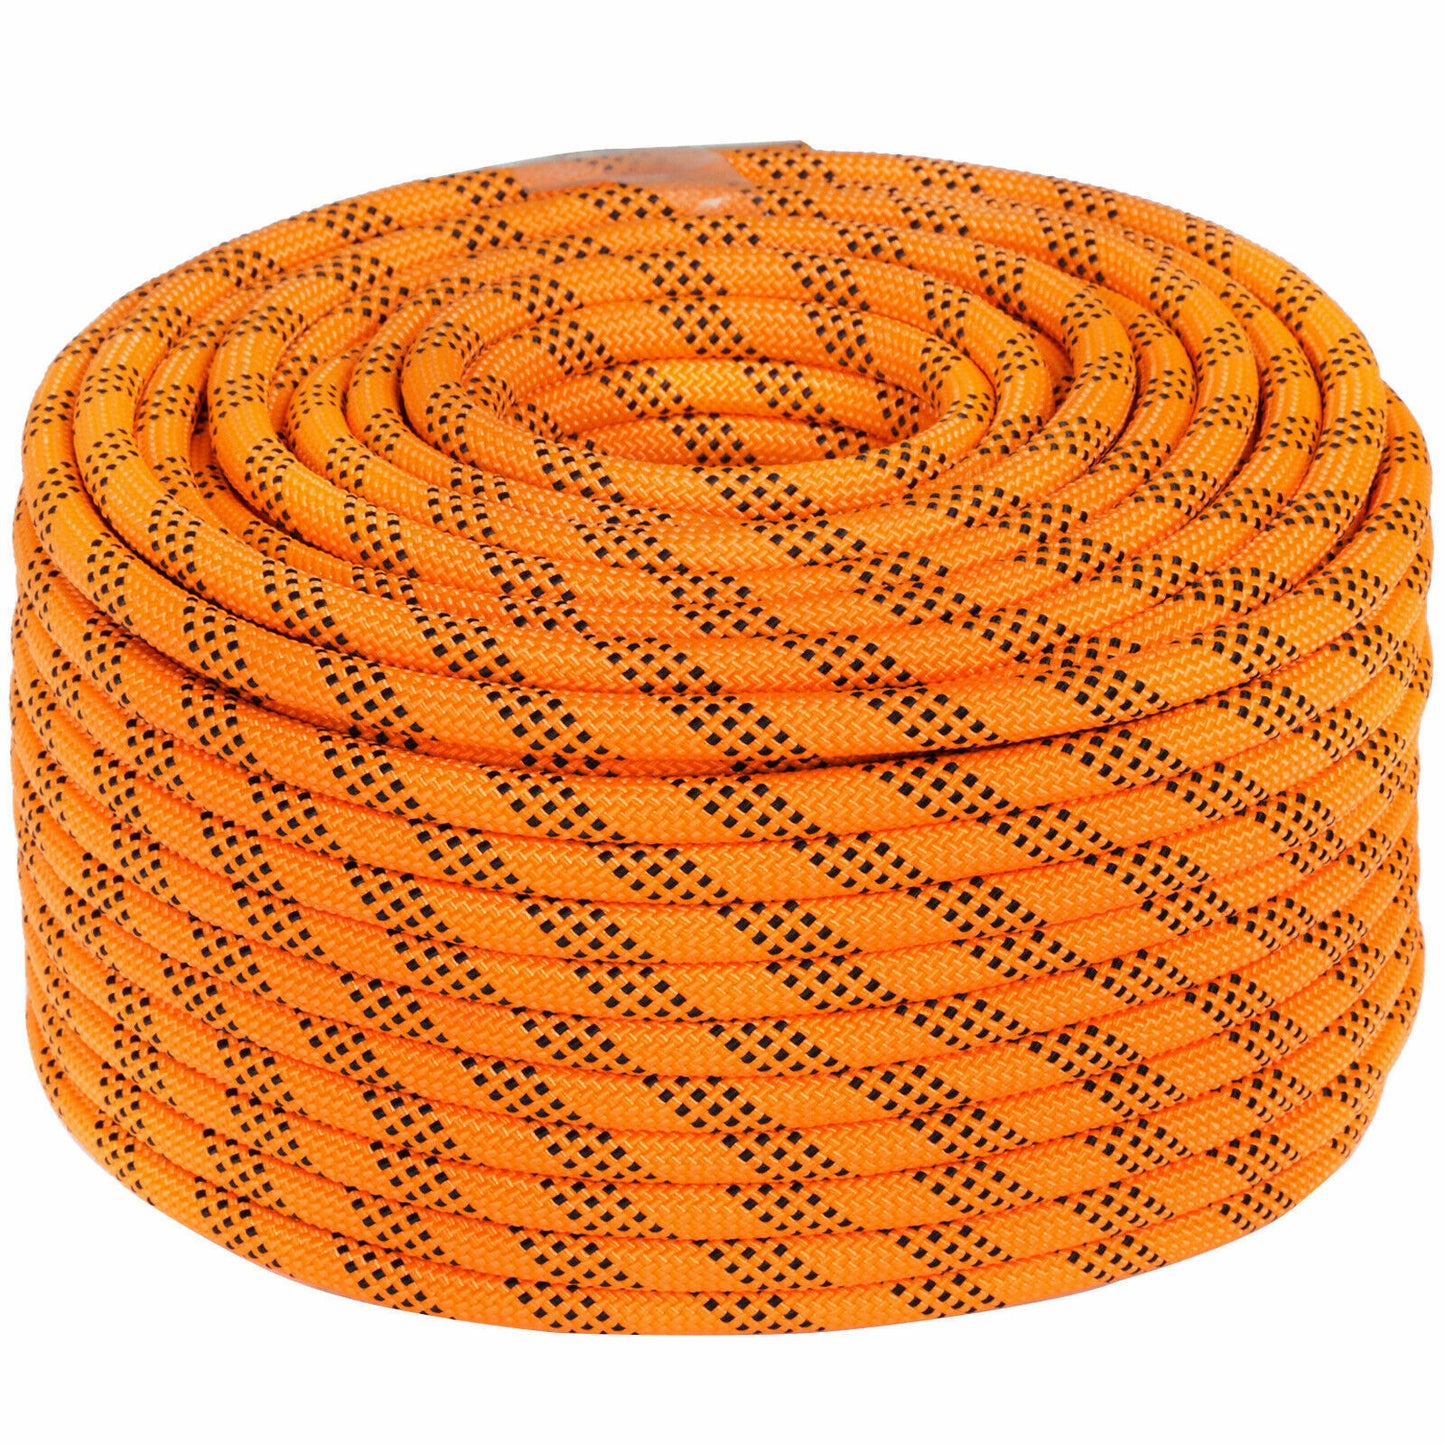 200FT 7/16" Double Braid Polyester Rope Rigging Rope 8400lbs Breaking Strength